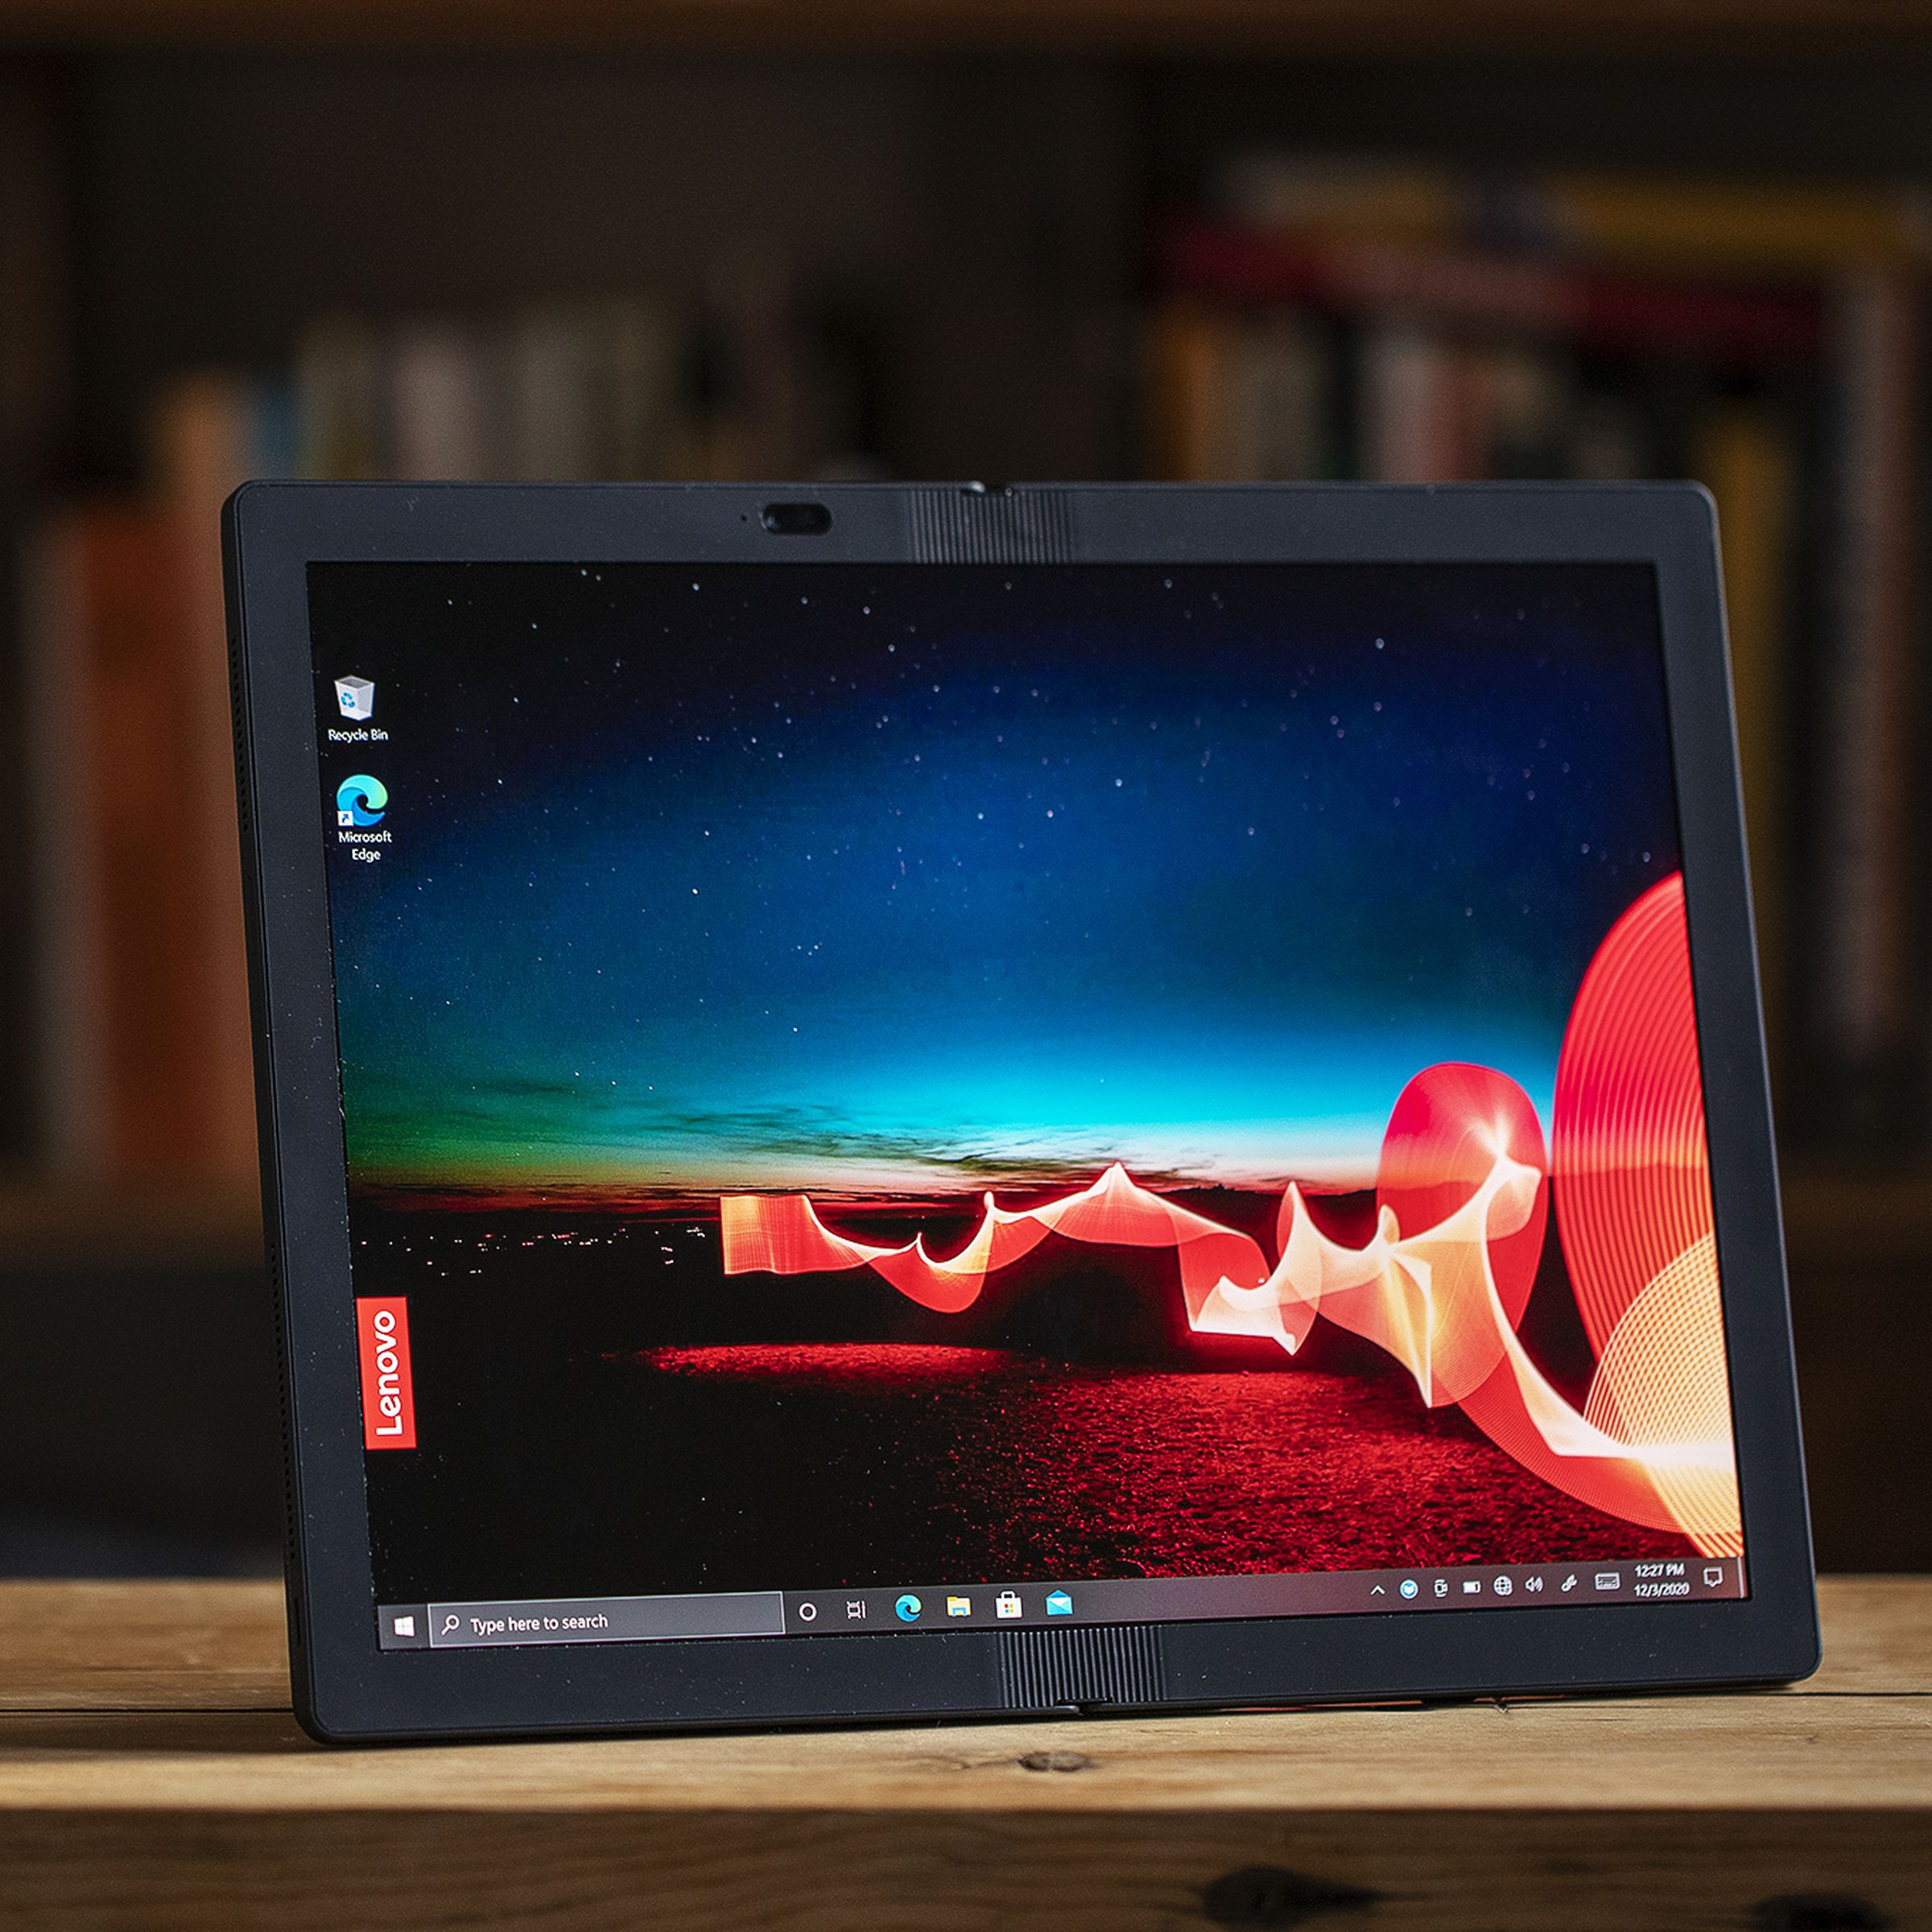 The Lenovo ThinkPad X1 Fold unfolded, propped up by its kickstand.